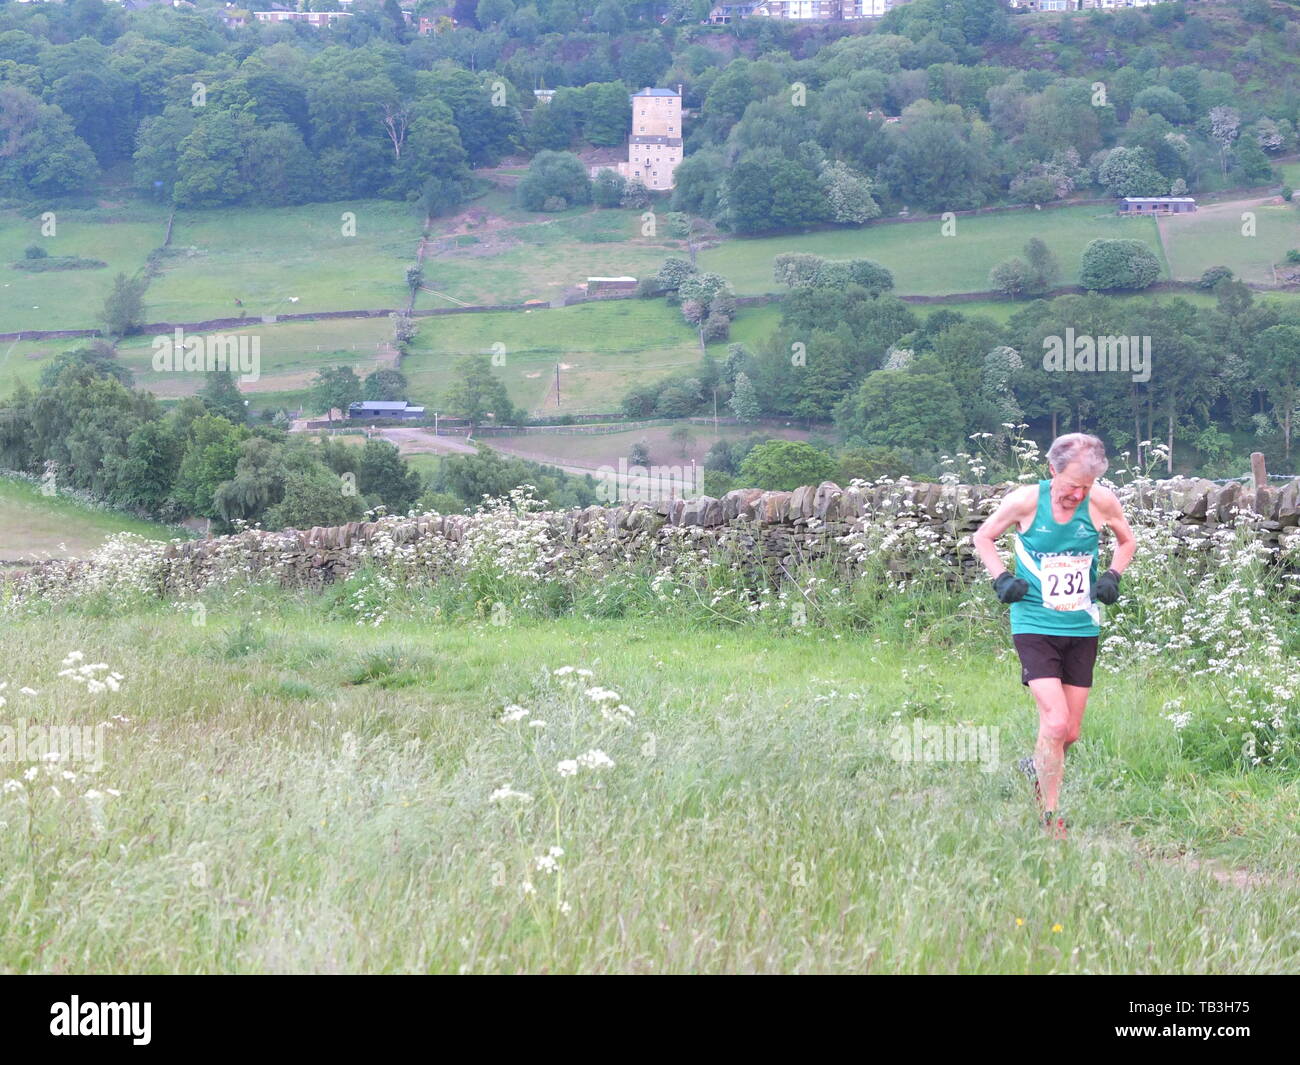 Runner in the Hallam Chase from Crosspool in Sheffield to Stannington, claimed as oldest continuously-run fell race in the world dating back to 1862. Stock Photo